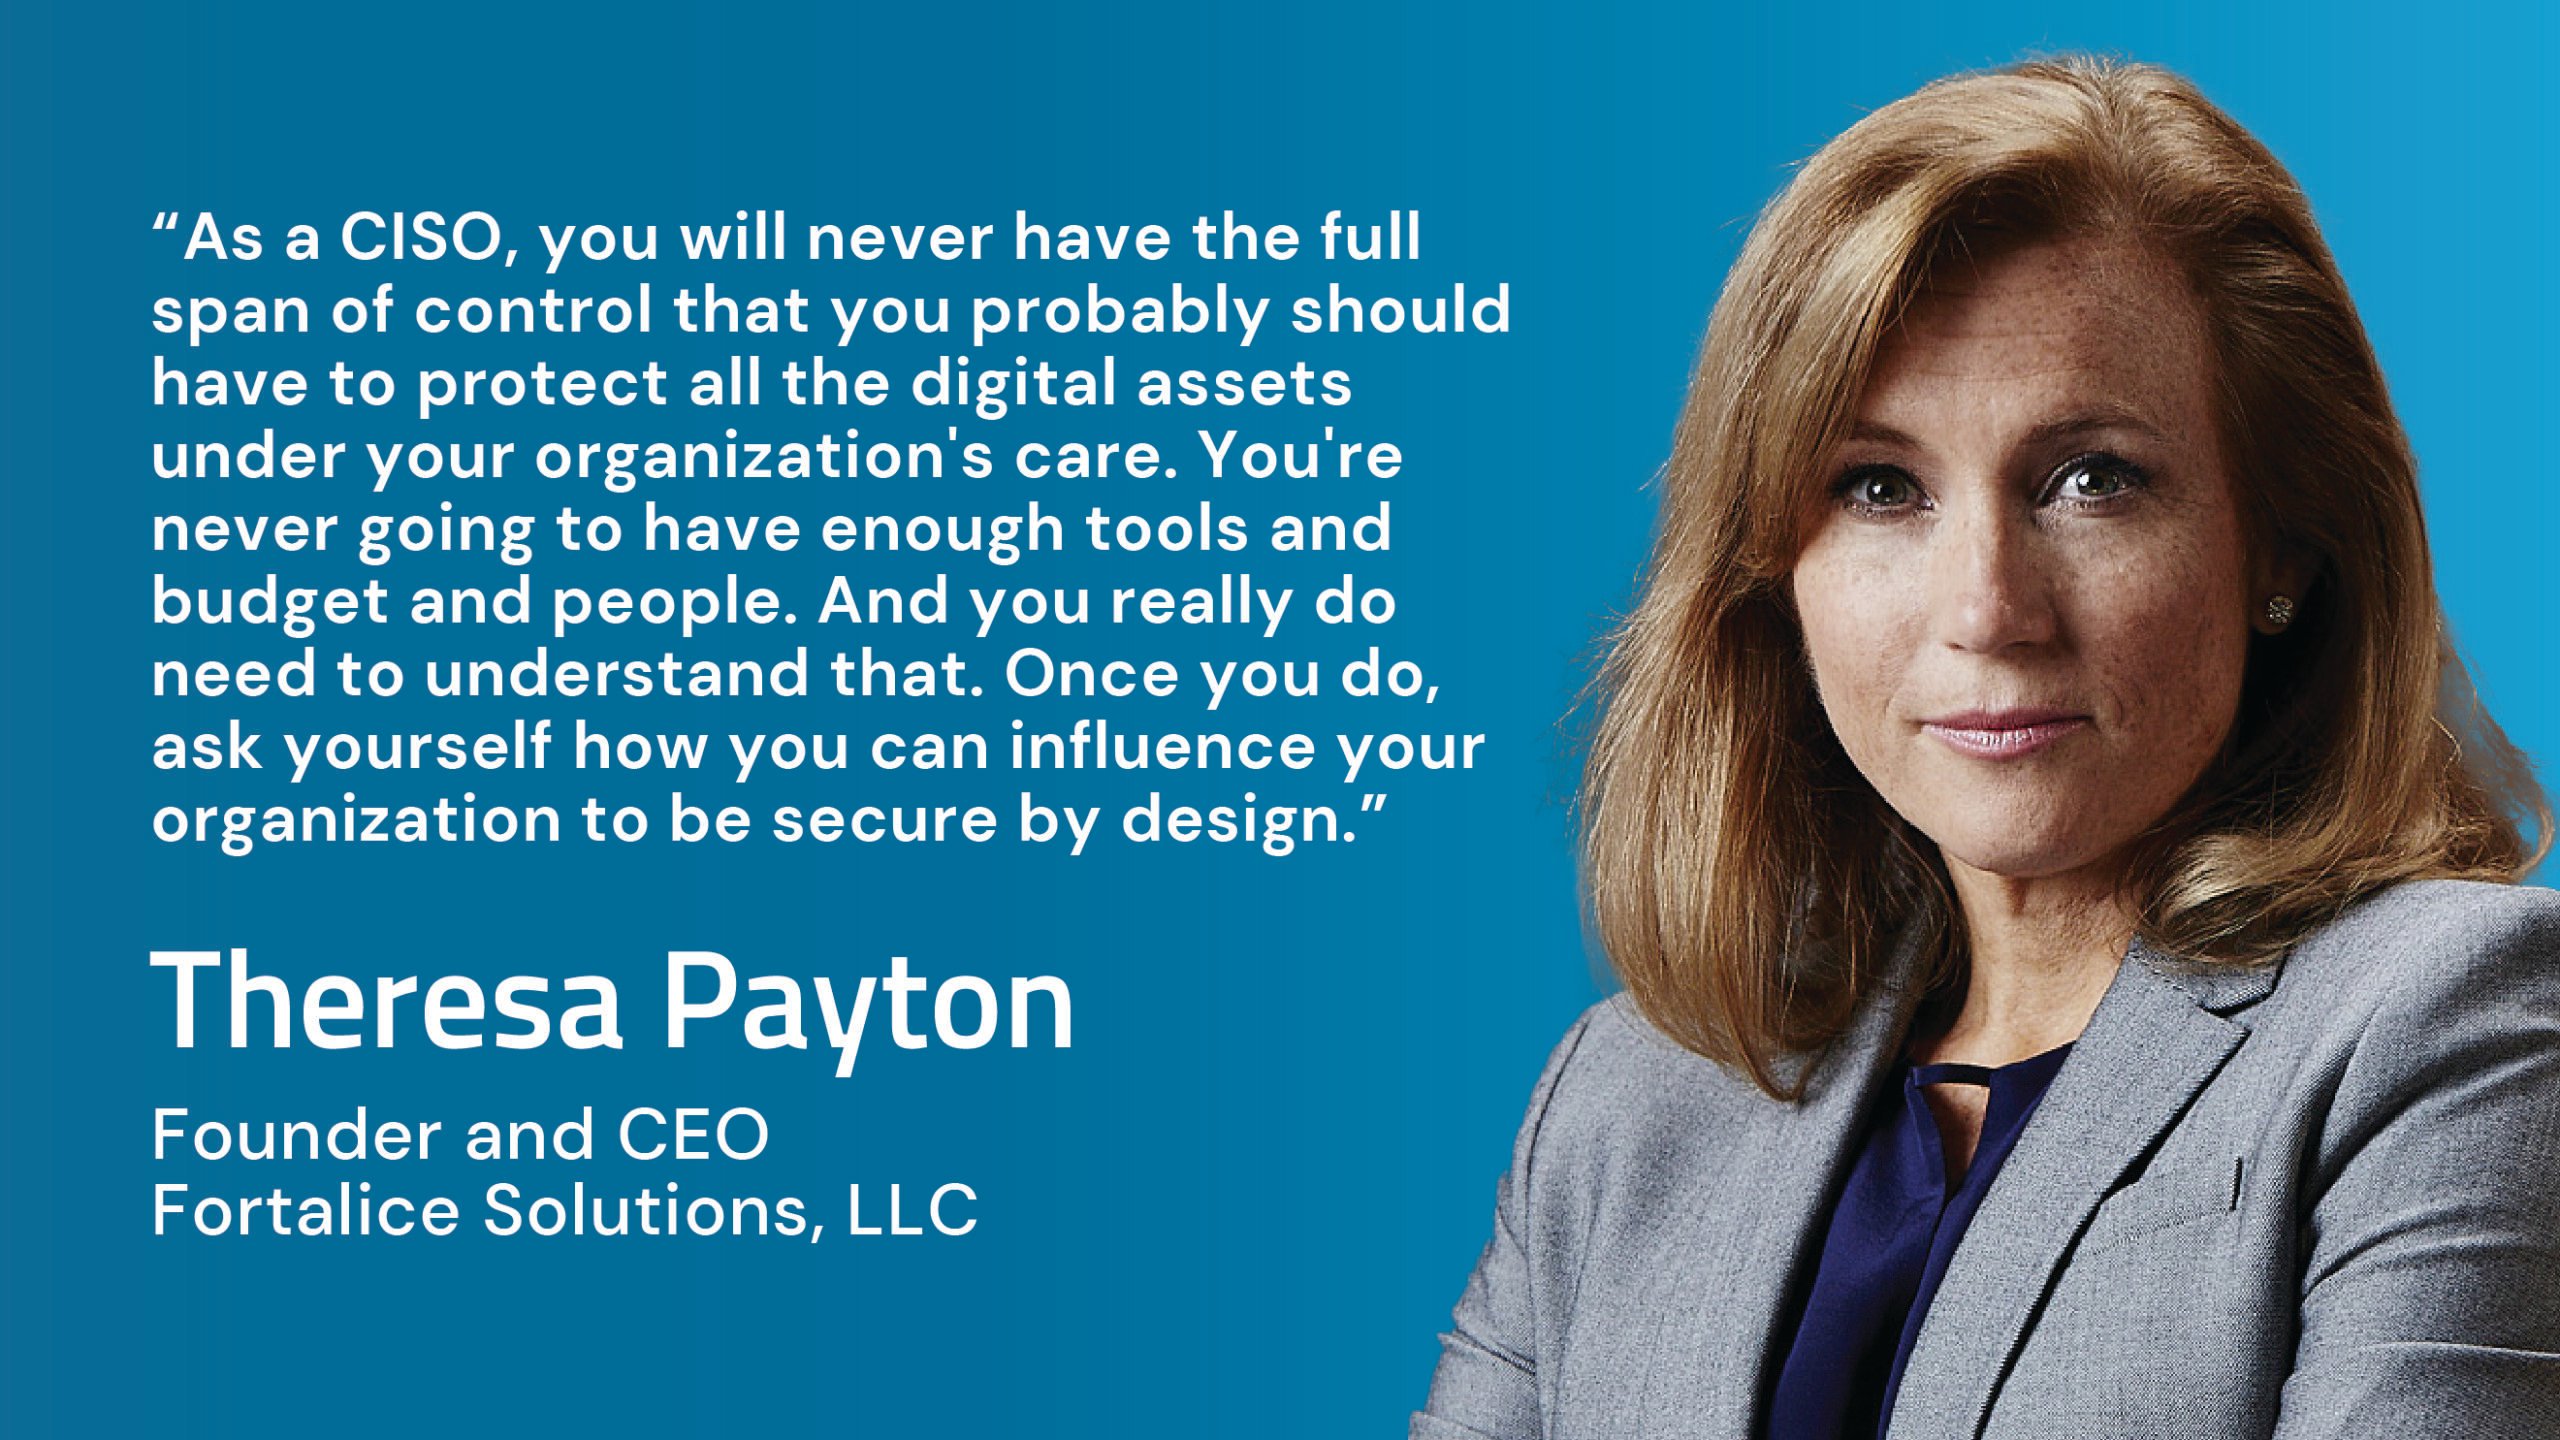 Photo of Theresa Payton, Founder and CEO of Fortalice Solutions, along with an accompanying pull quote from the article.